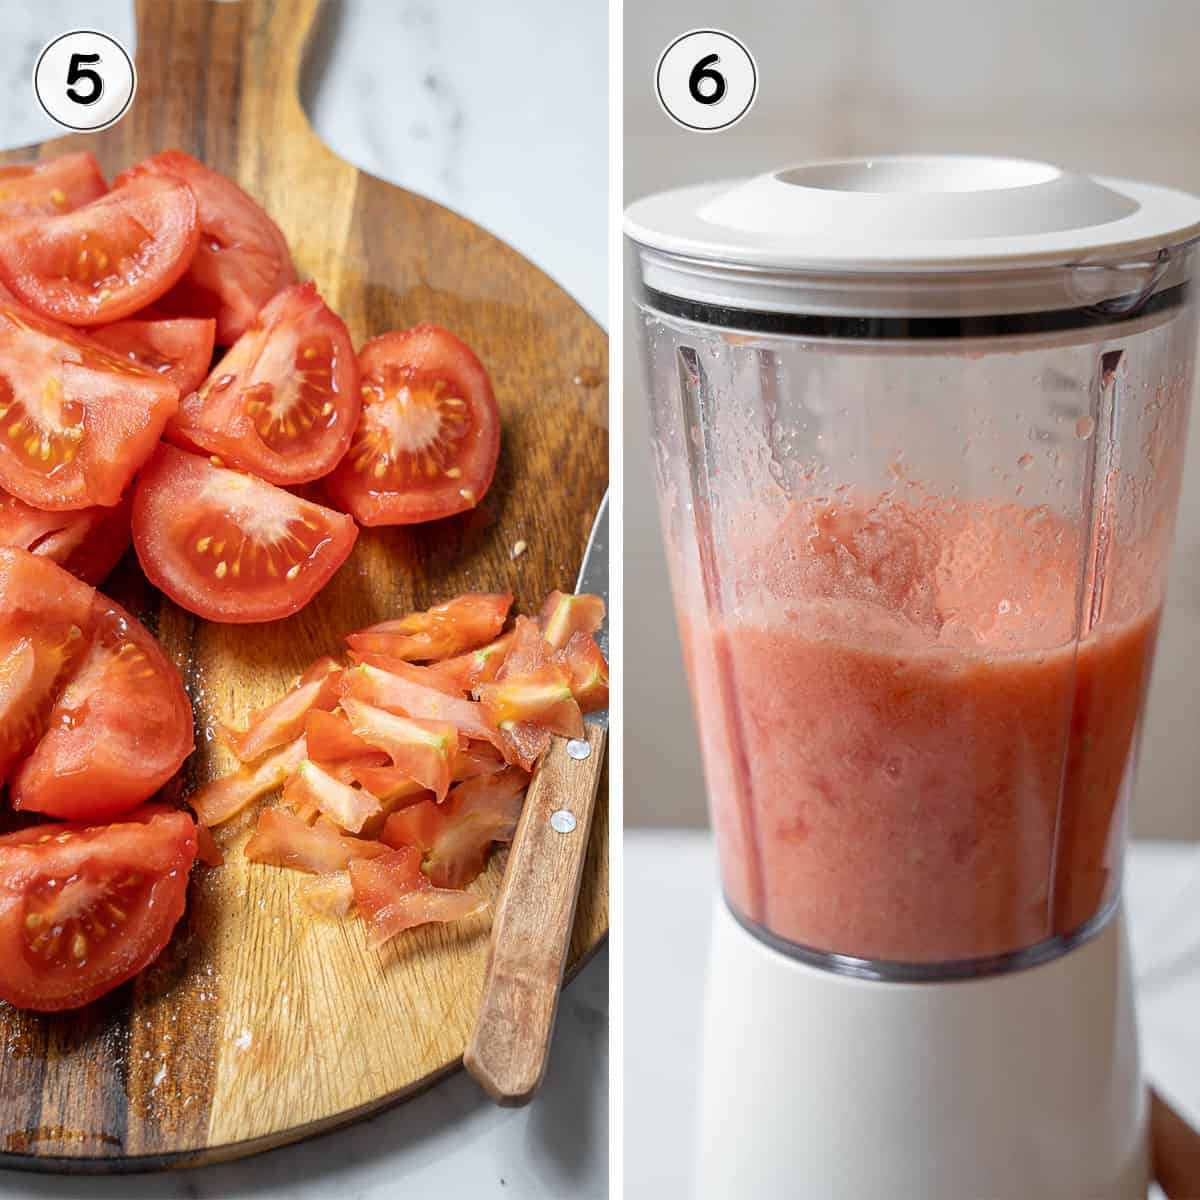 trimming and pureeing the tomatoes in a blender.